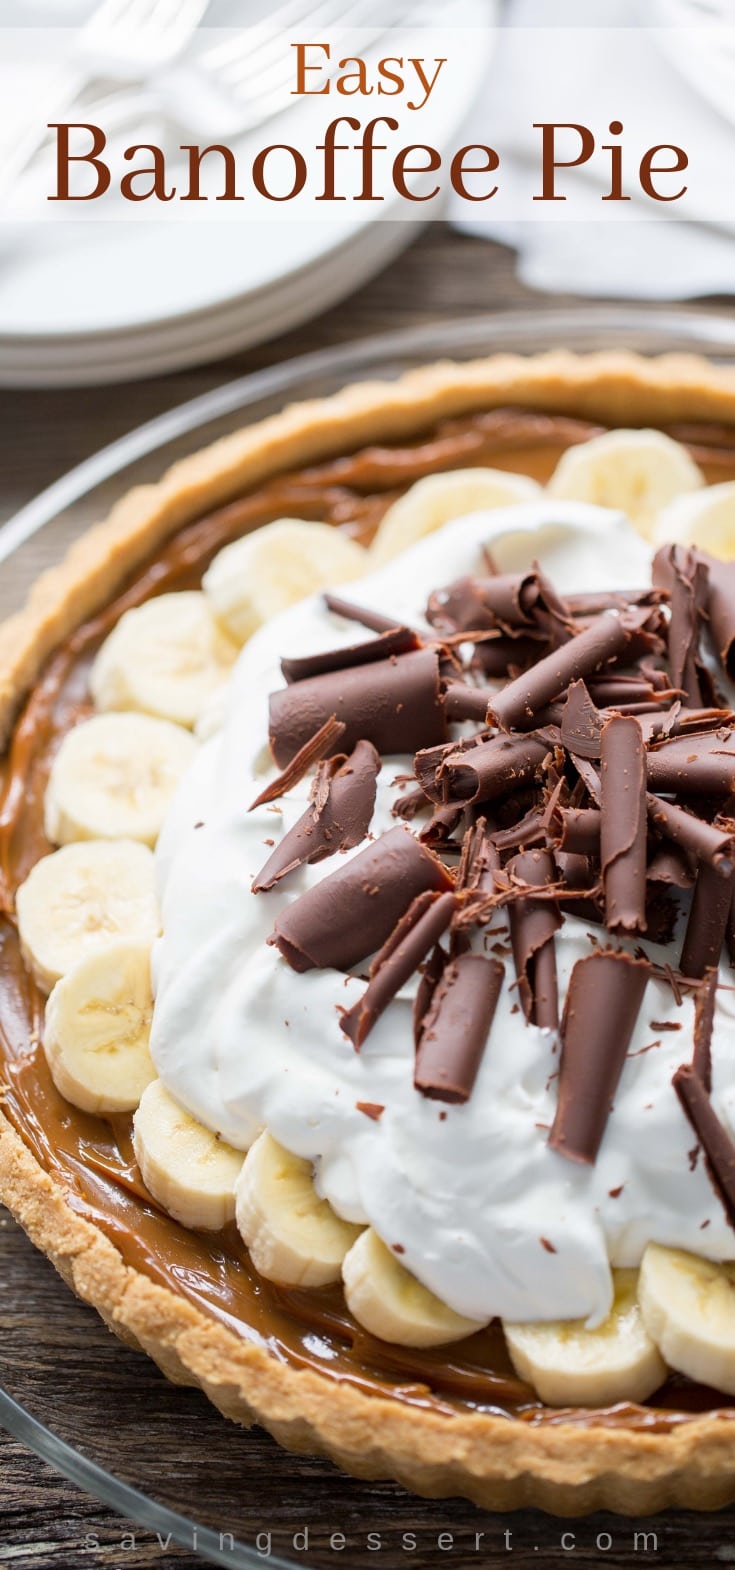 Banoffee Pie topped with whipped cream, bananas and chocolate curls